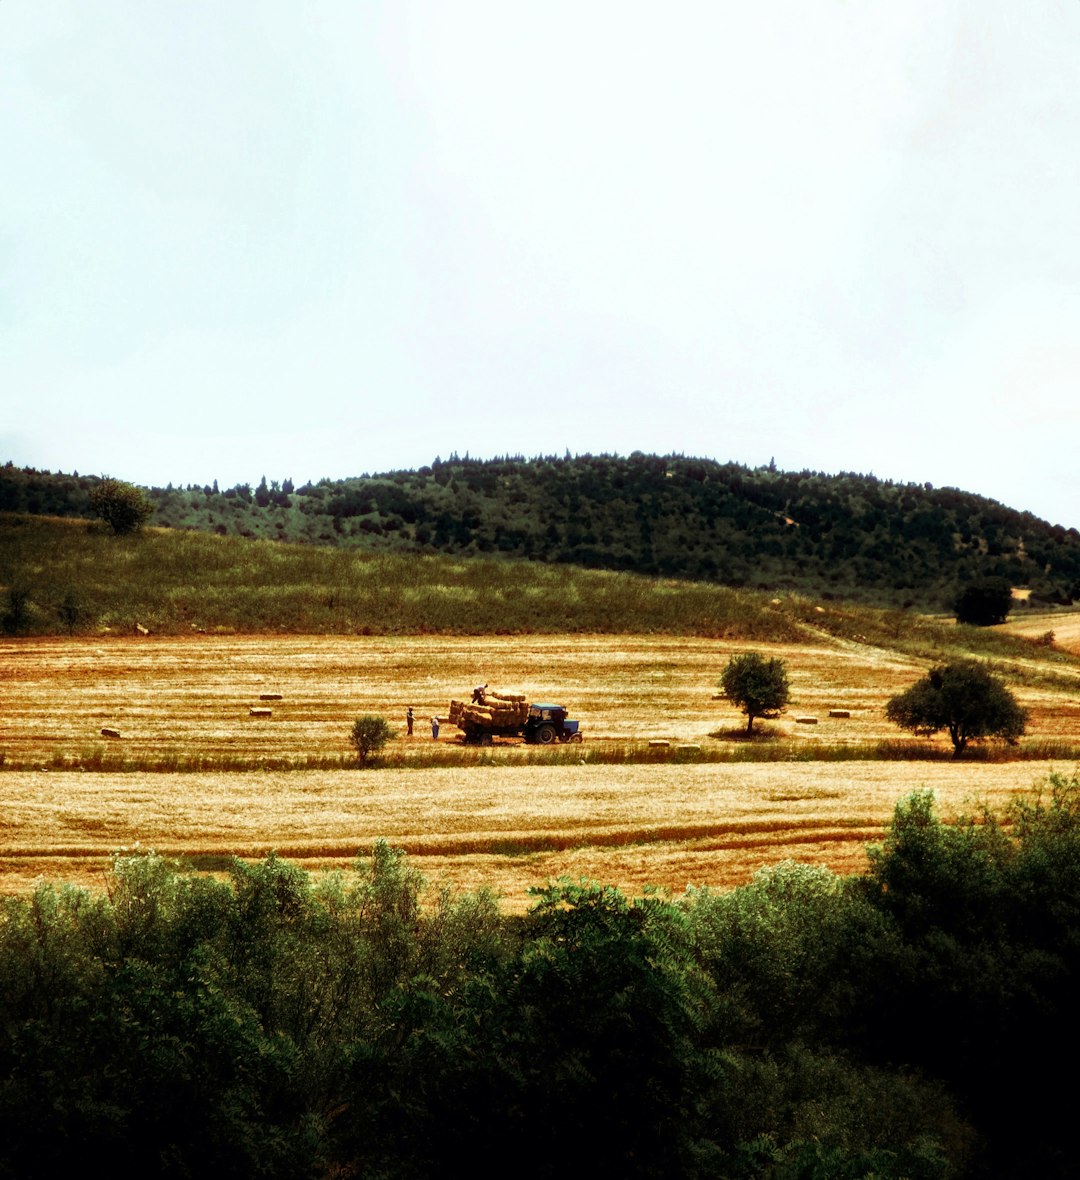 Harvesting hay bales with machine on a field during day